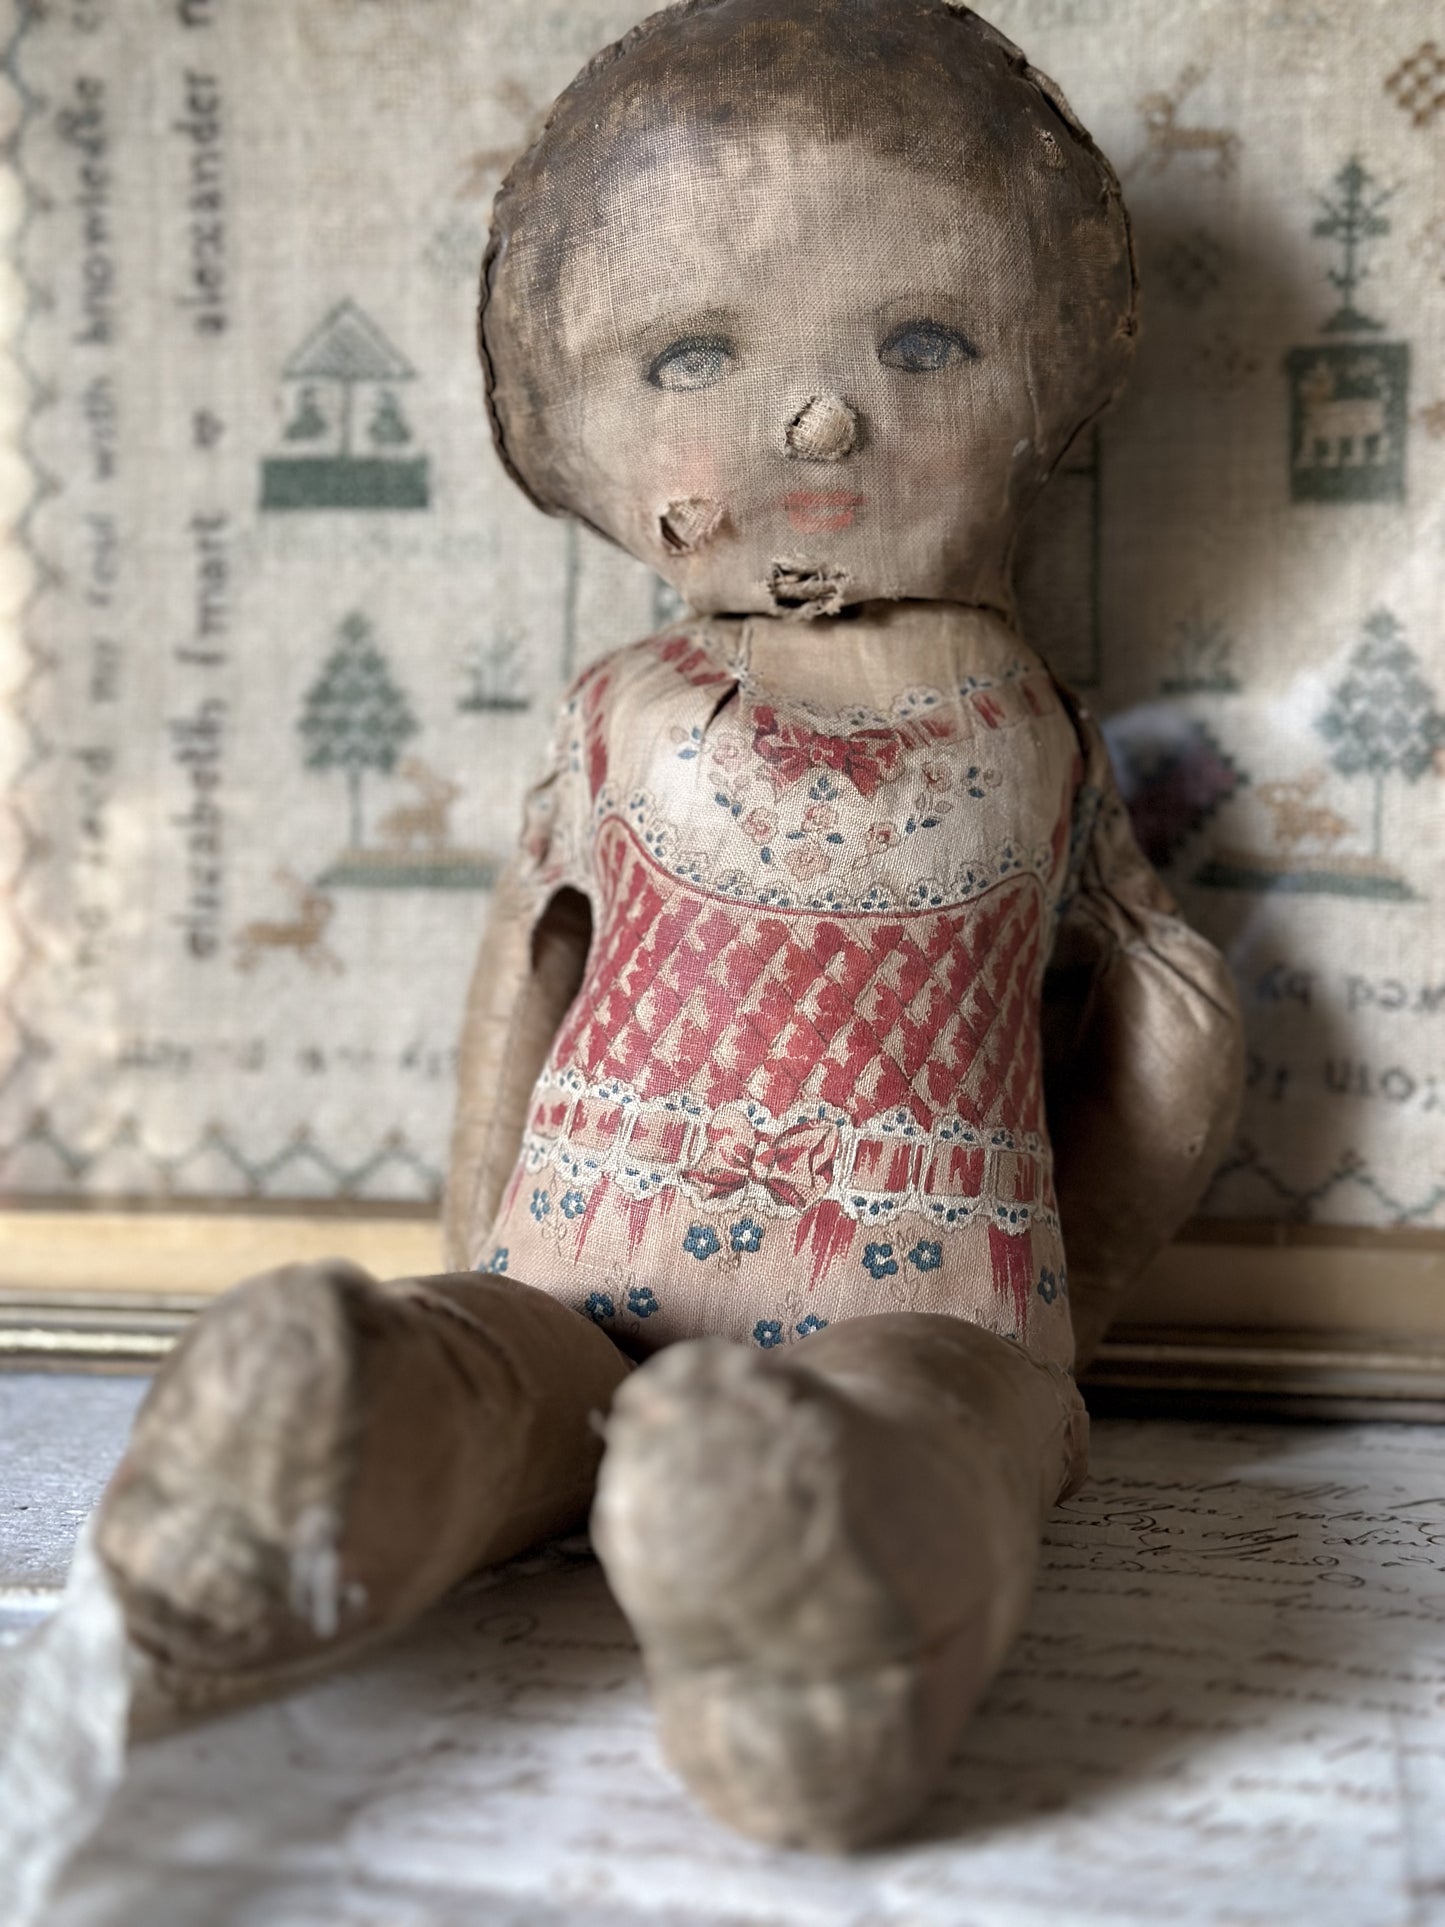 Gorgeous early Dean’s Rag book printed doll with pink flowers